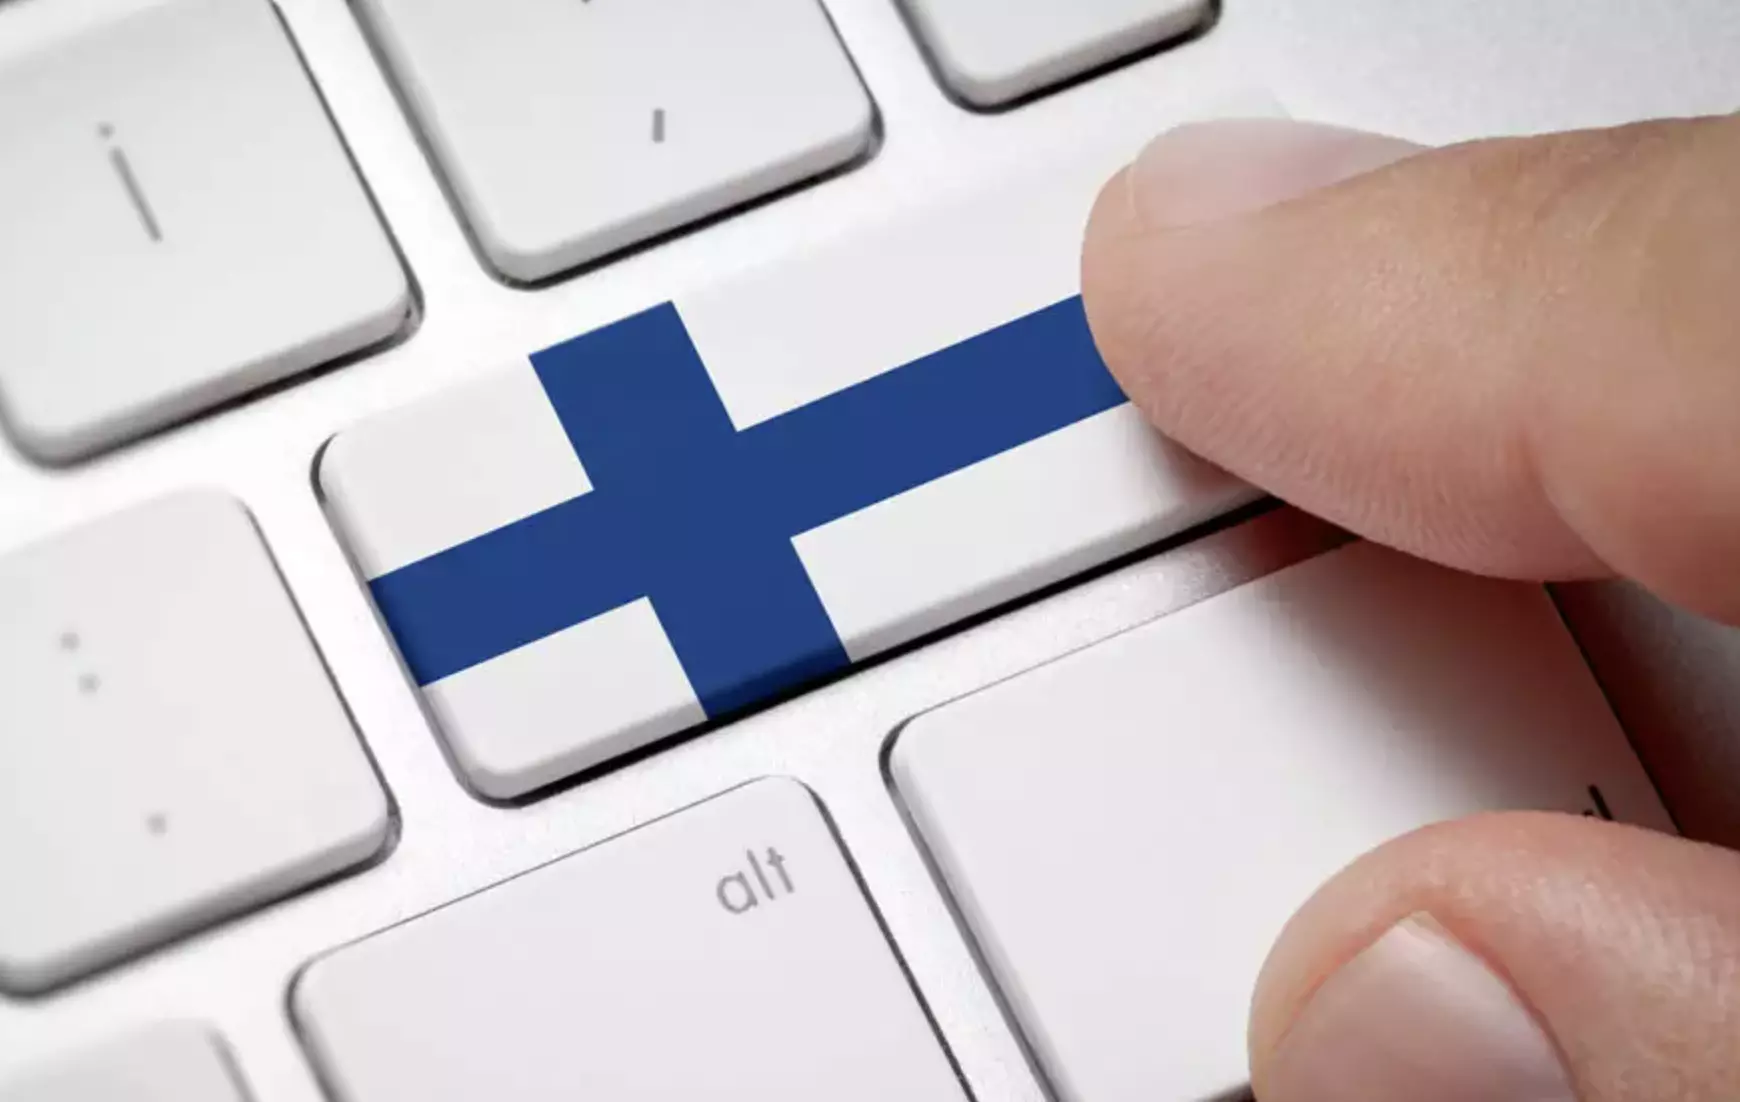 Unregulated gambling is also a problem in Finland